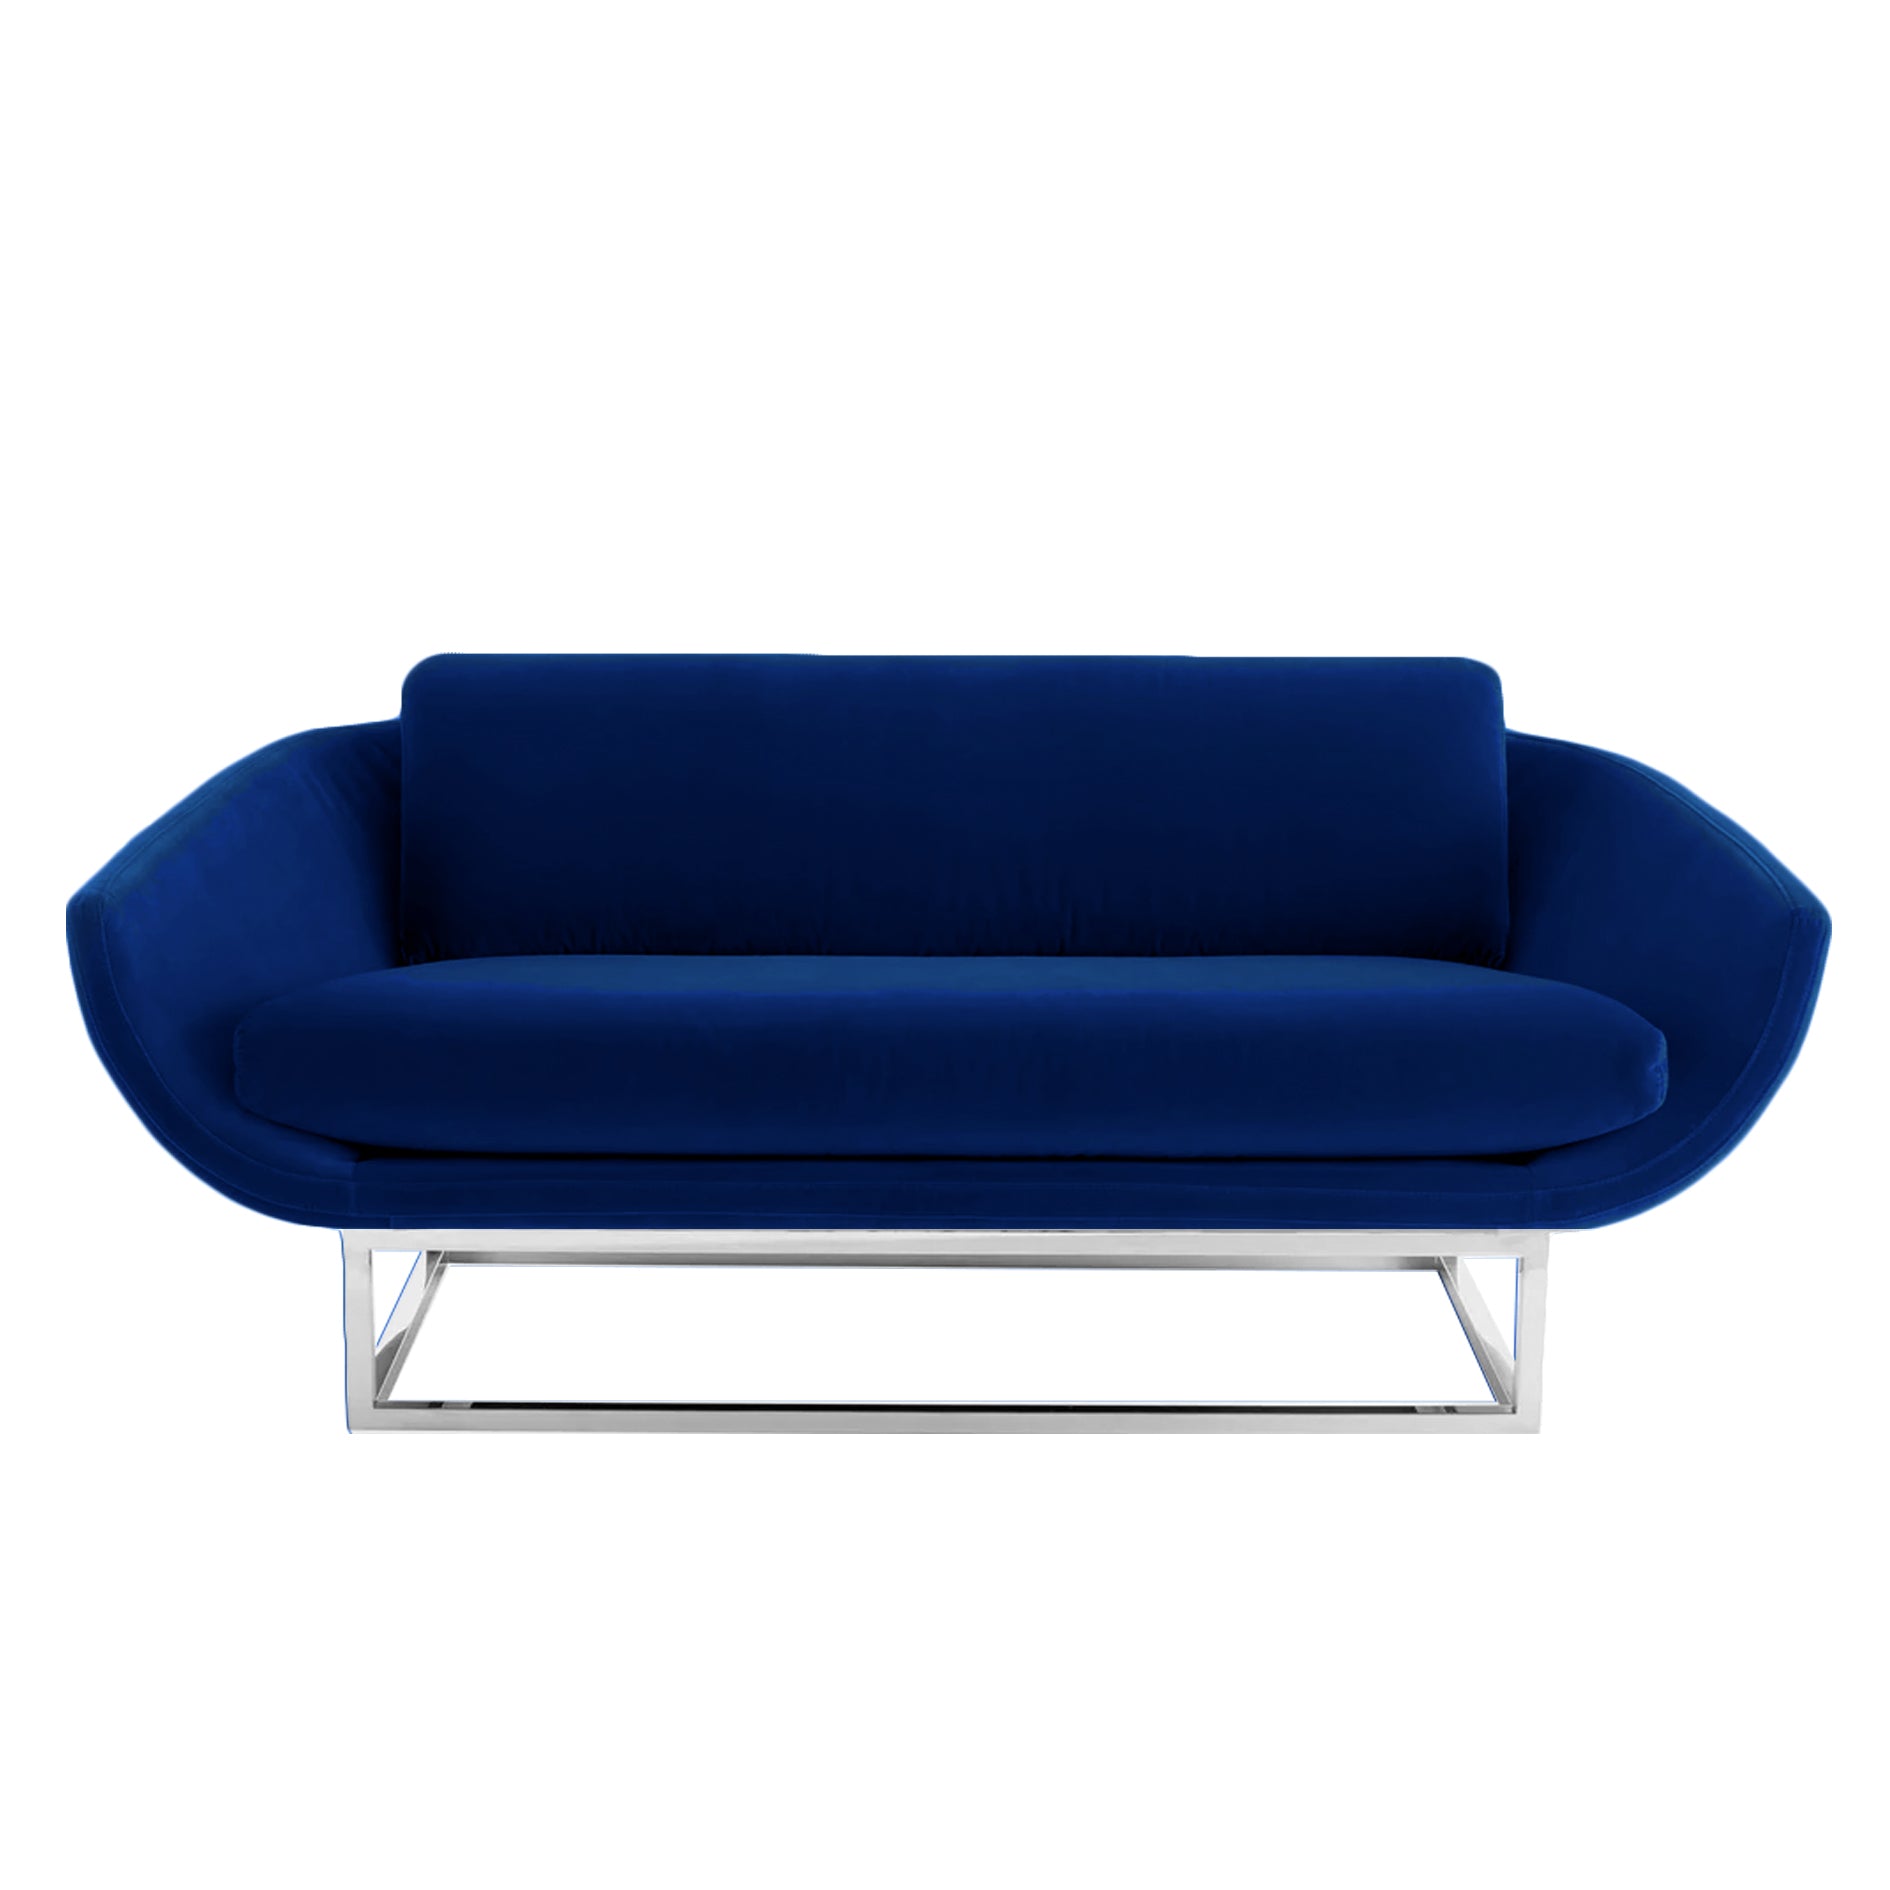 contemporary upholstery sofa with metal base, perfect for luxurious event seating.